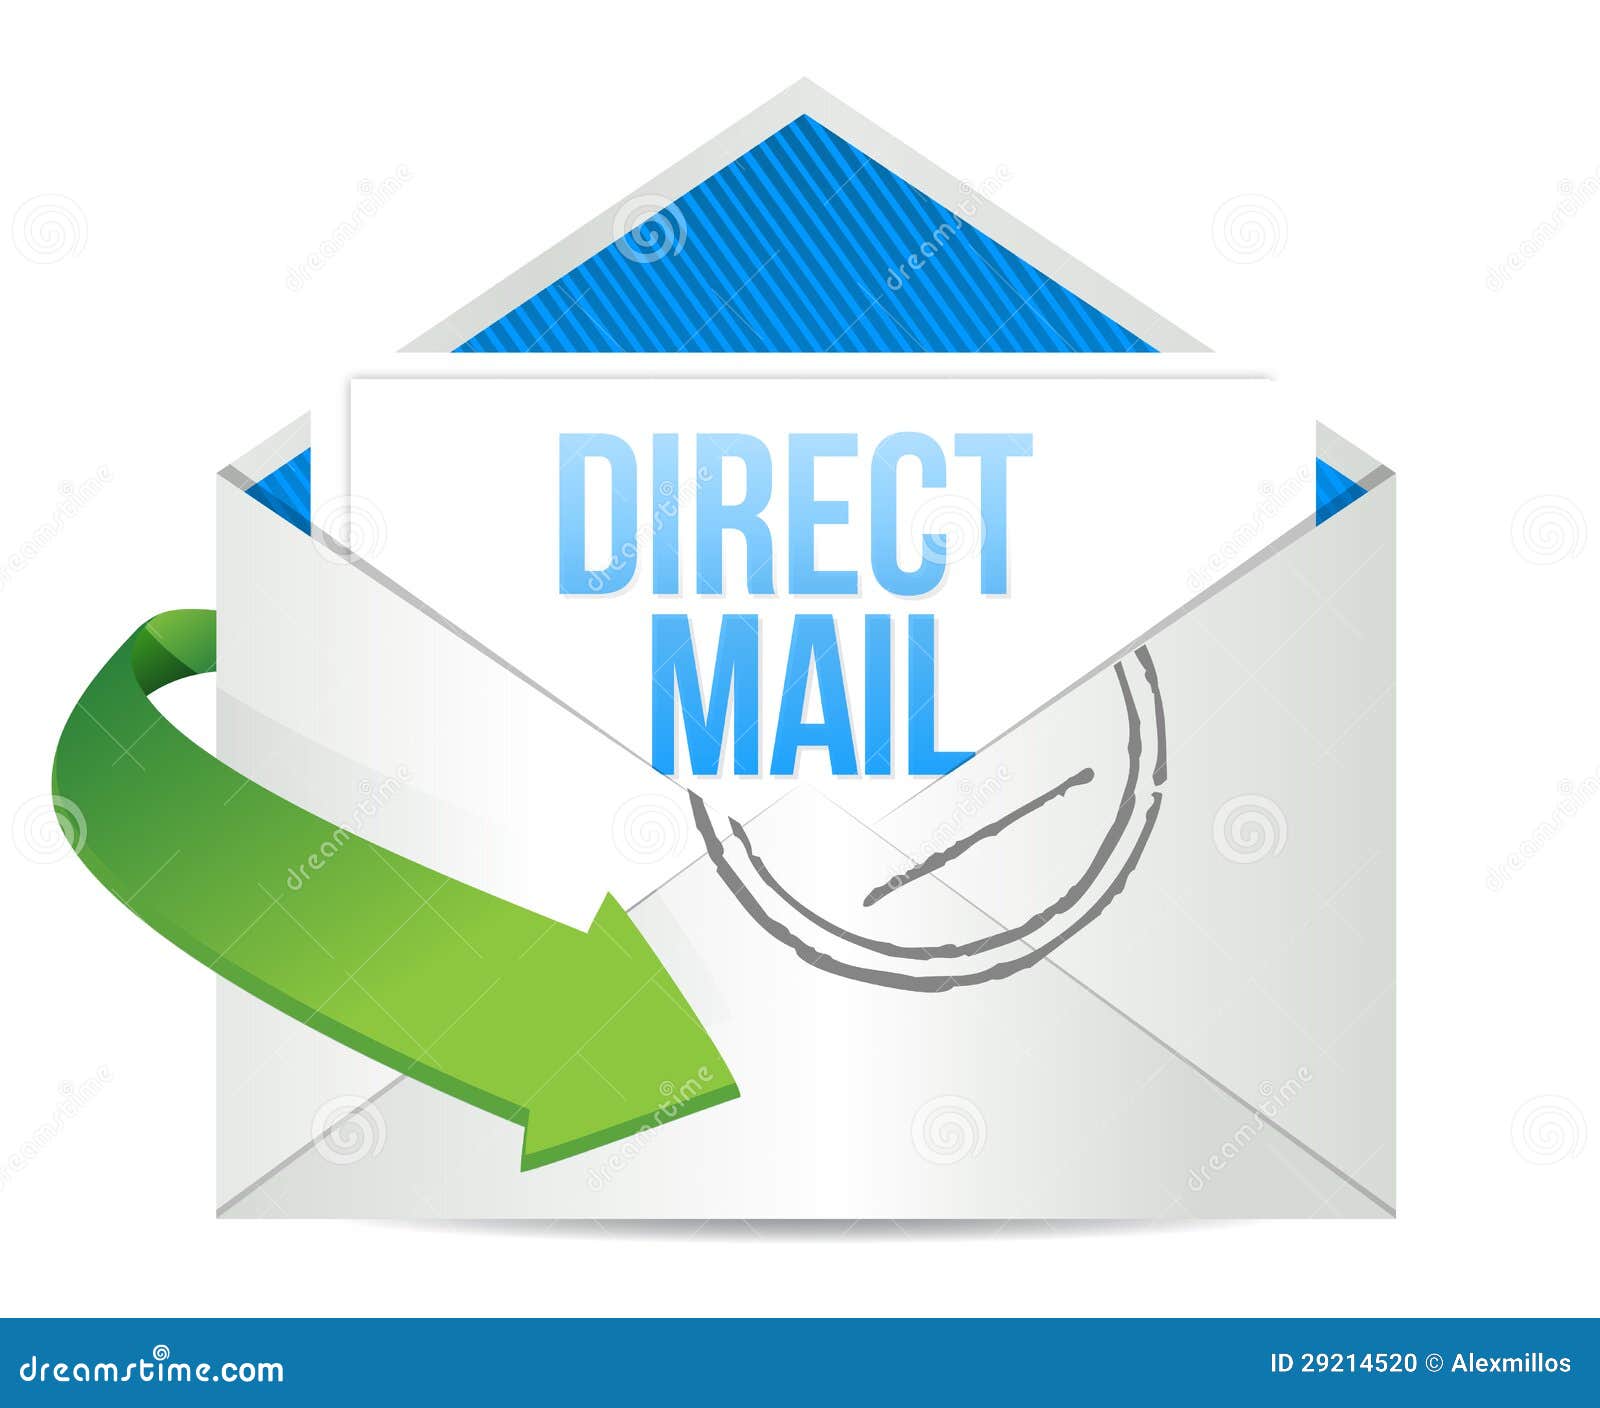 Advertising Direct Mail Working Concept Stock Illustration ...